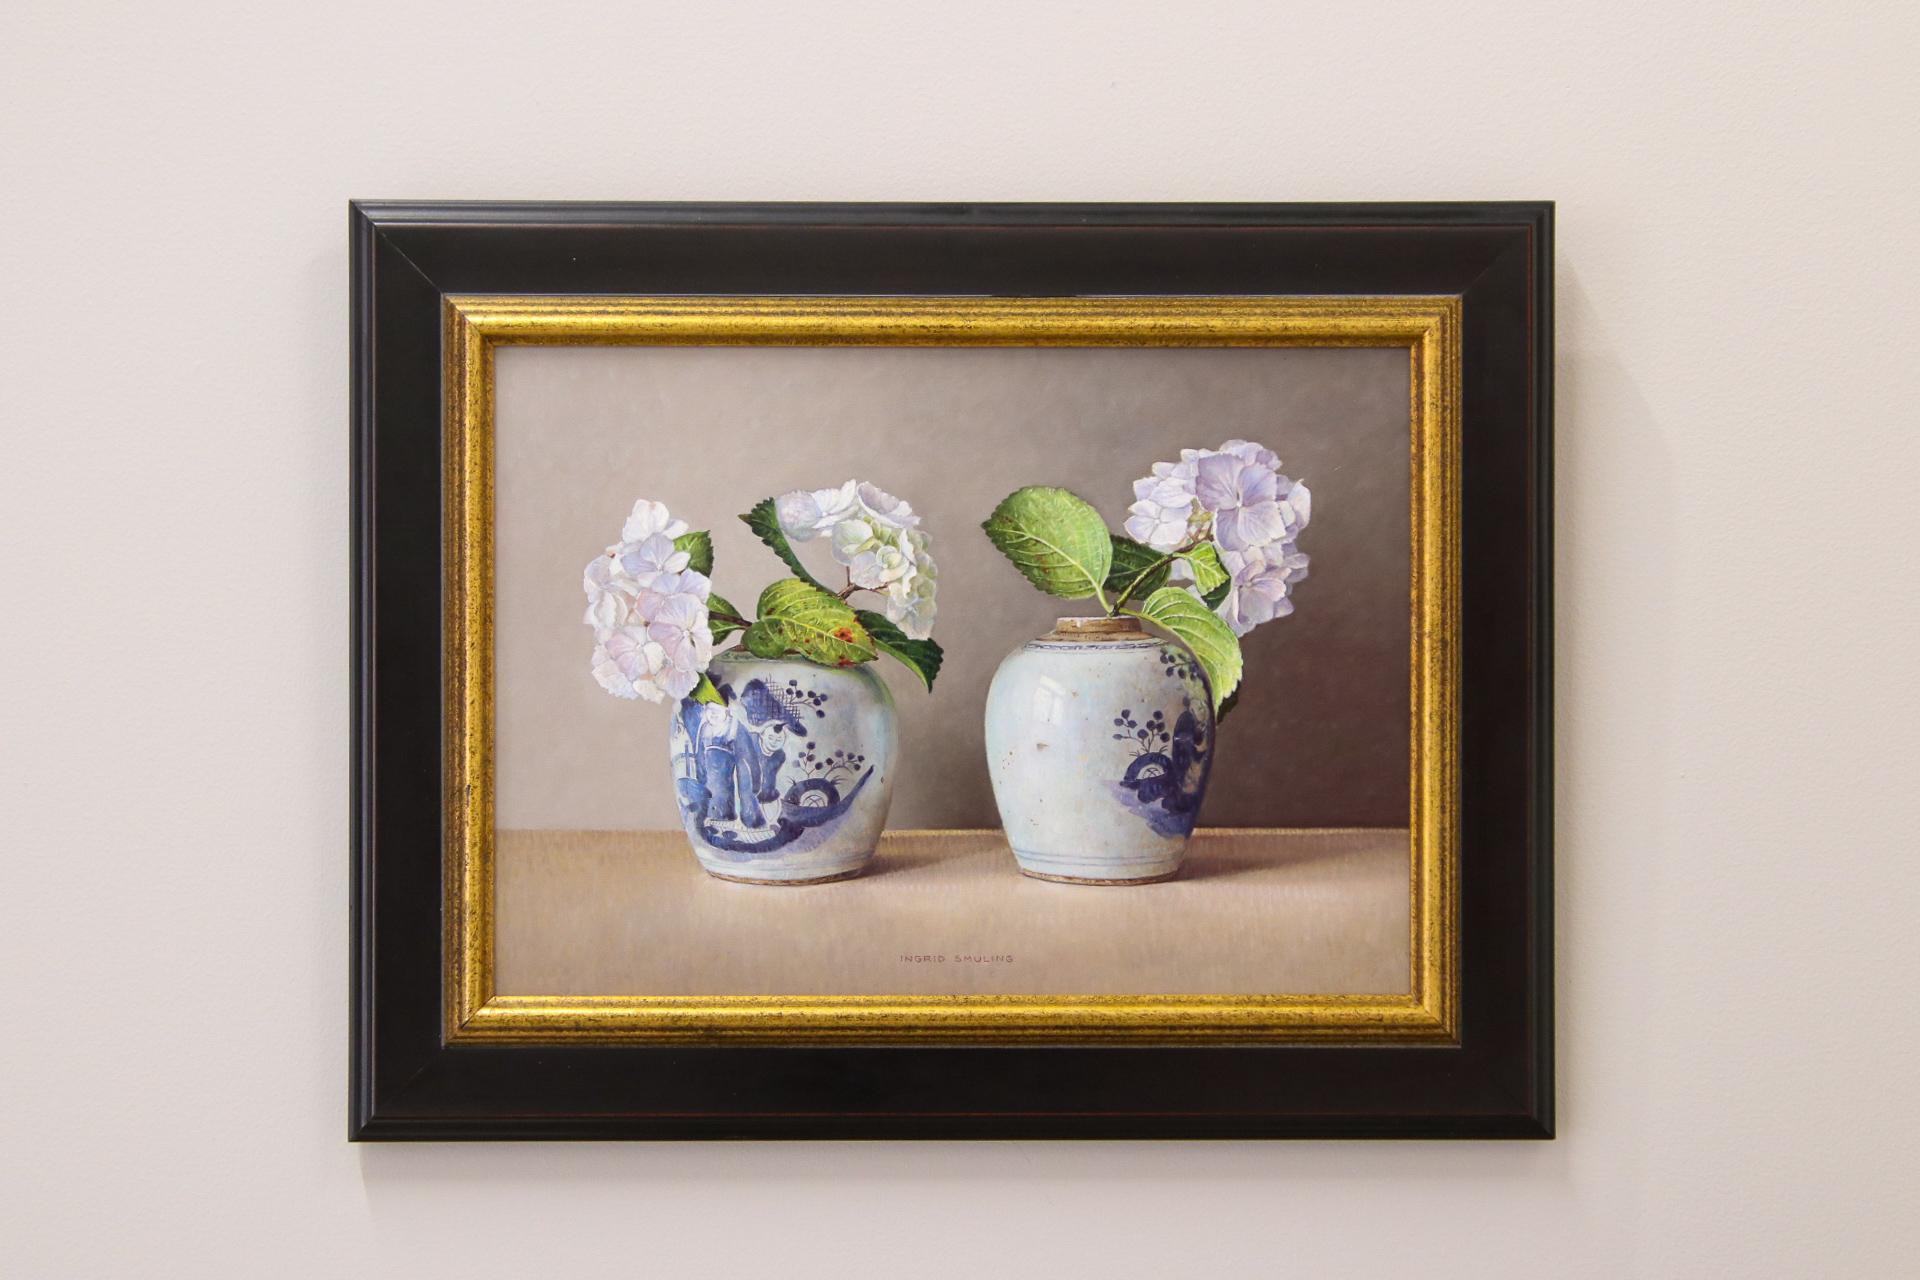 White Hydrangea's in Chinese Pots - 21st Century Contemporary Still-Life - Painting by Ingrid Smuling